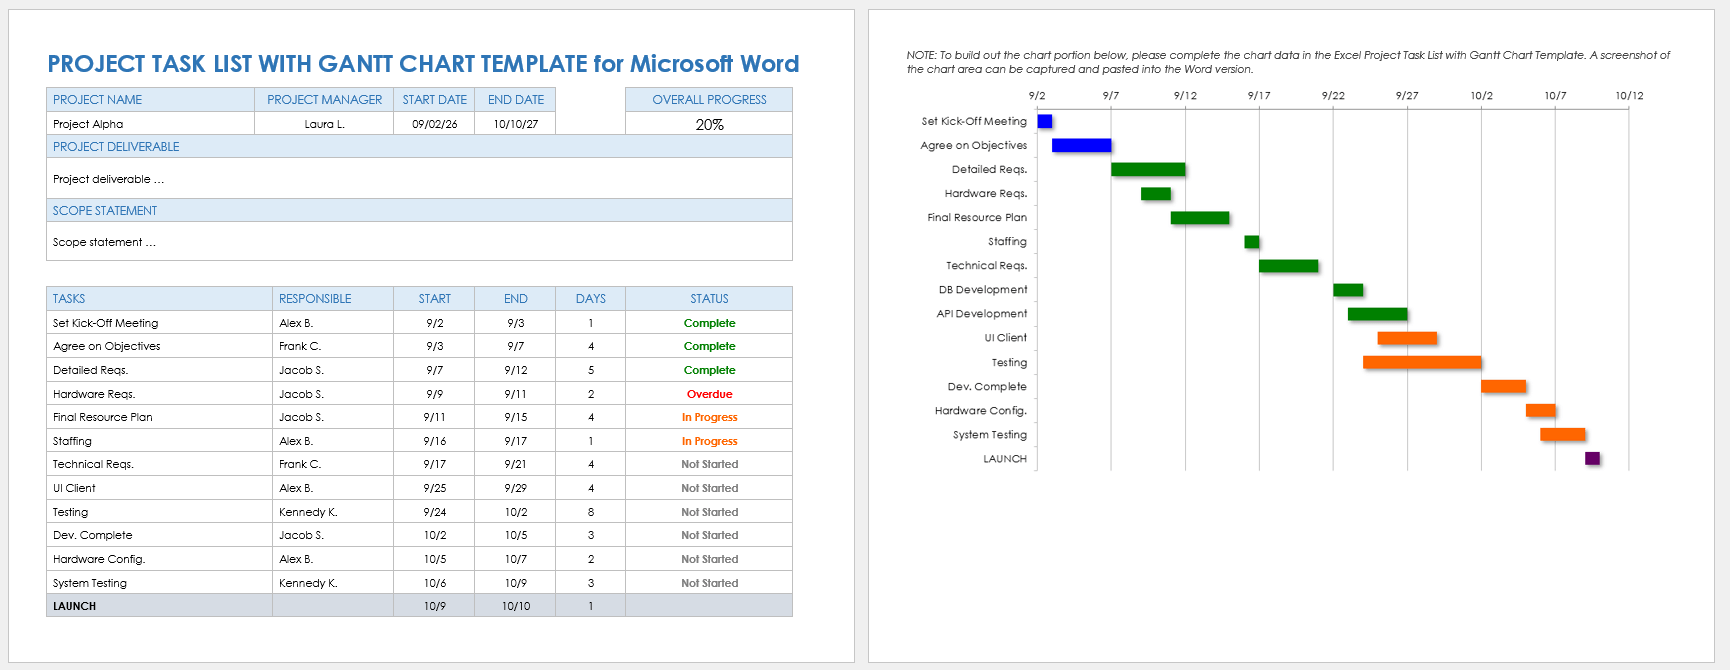 Project Task List with Gantt Chart Template Microsoft Word